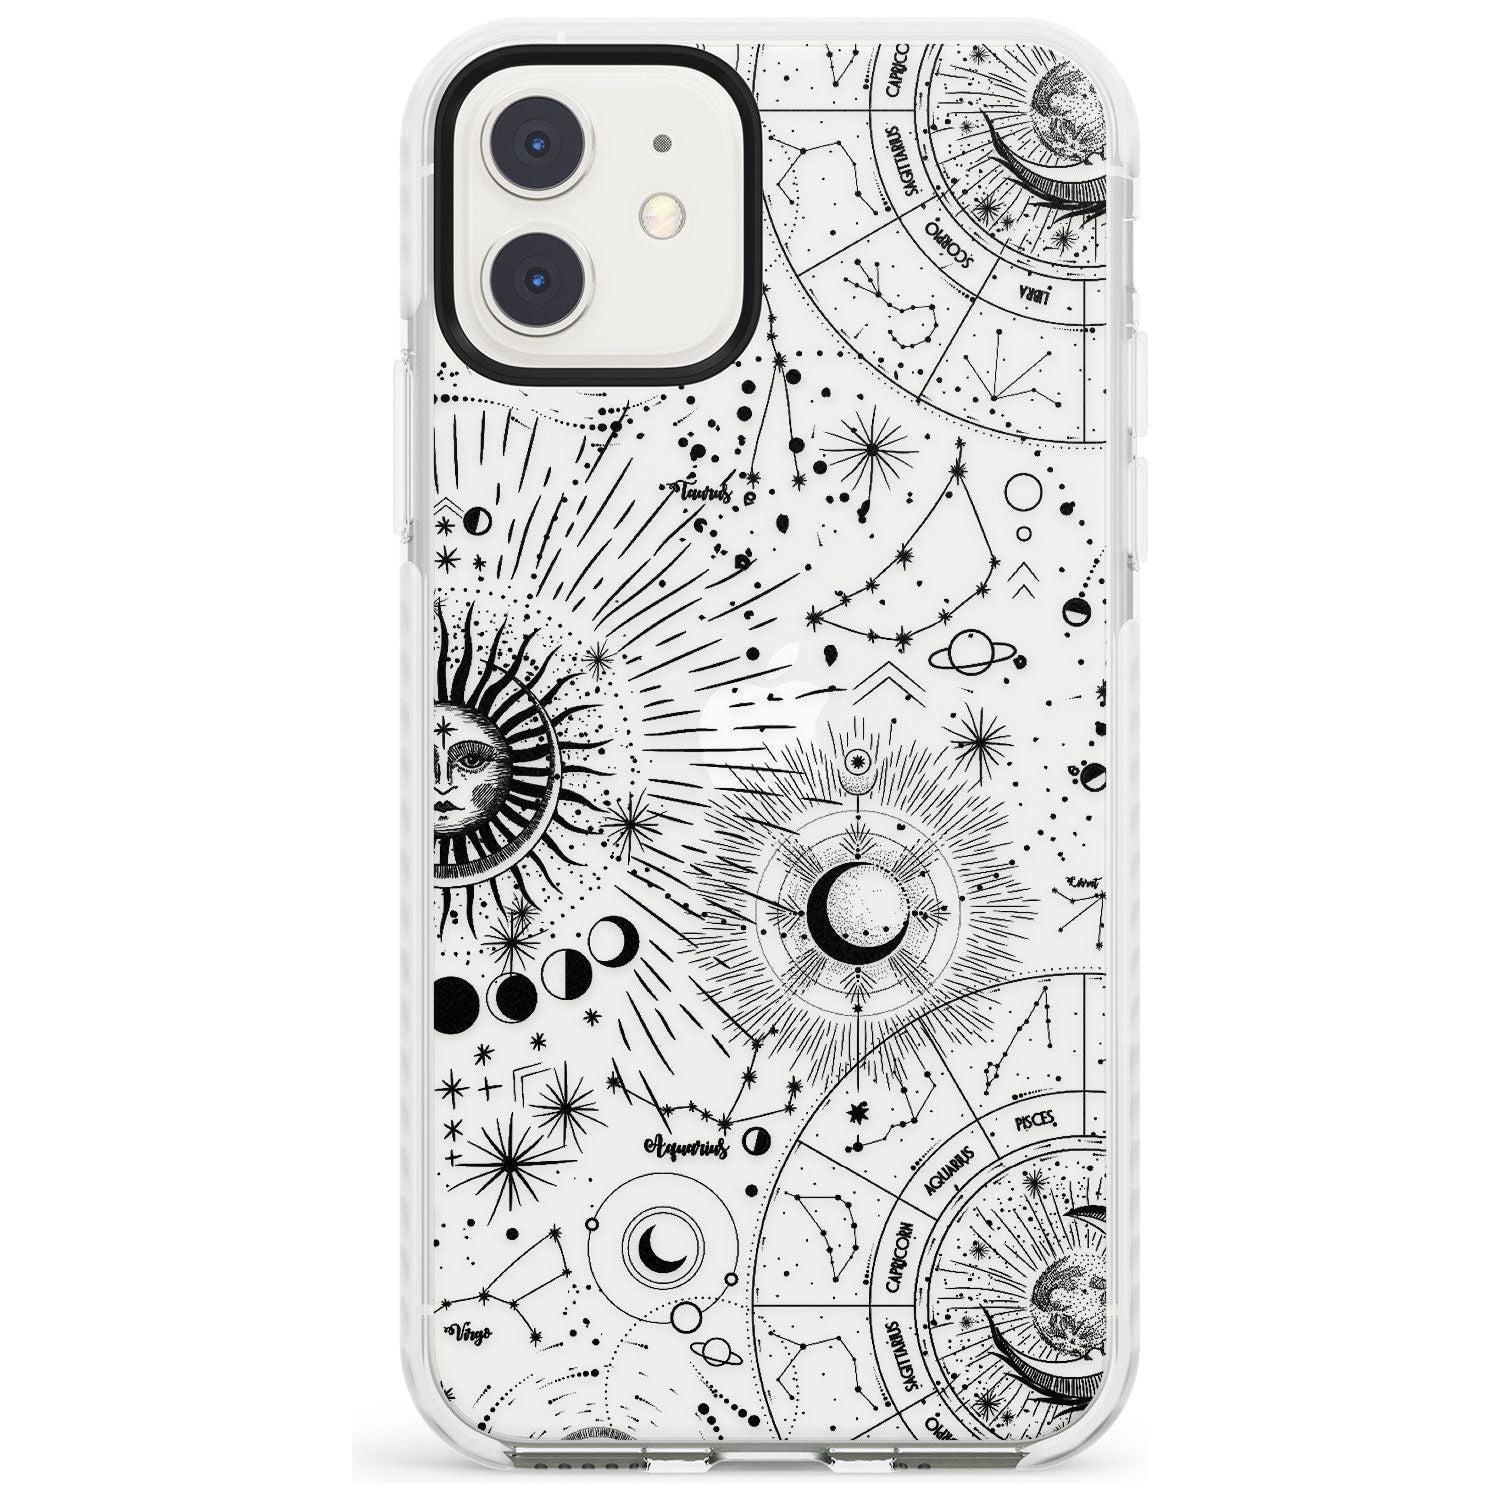 Suns & Constellations Astrological Impact Phone Case for iPhone 11